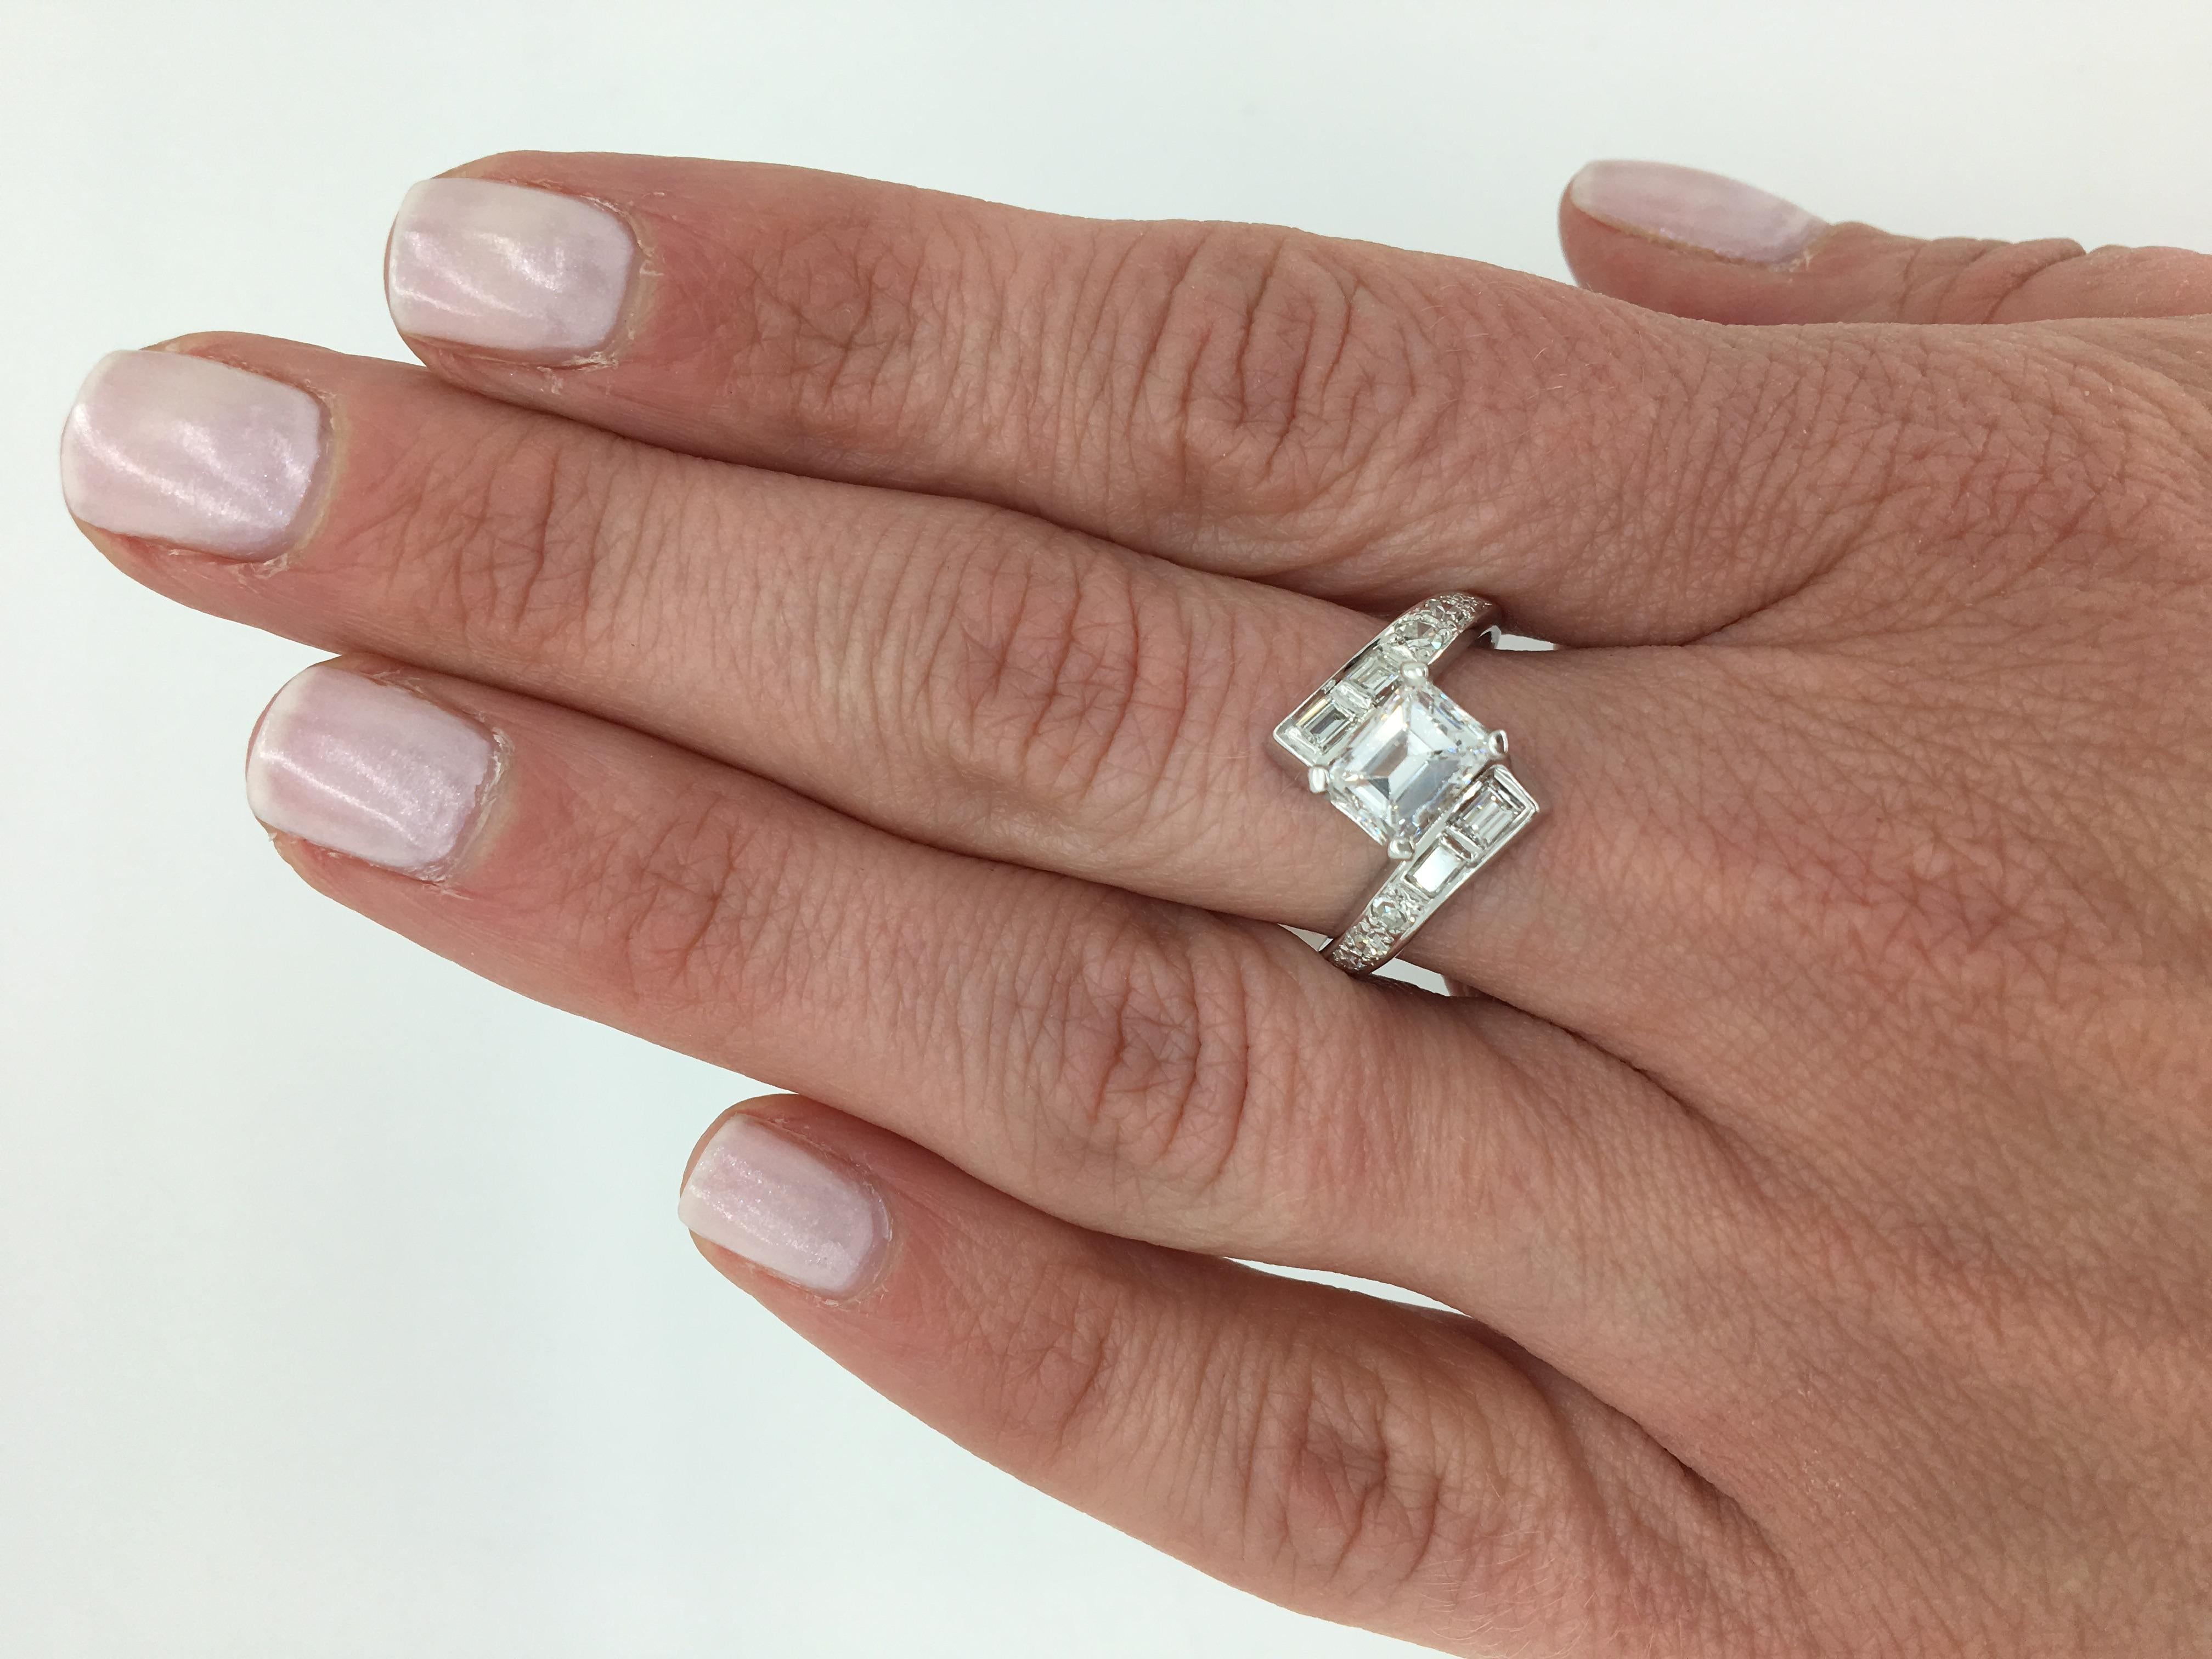 Unique Emerald Cut bypass style diamond ring crafted in 18K white gold.

Center Diamond Carat Weight: Approximately 1.05CT
Center Diamond Cut: Emerald Cut
Center Diamond Color: G
Center Diamond Clarity: SI2
Total Diamond Carat Weight: Approximately